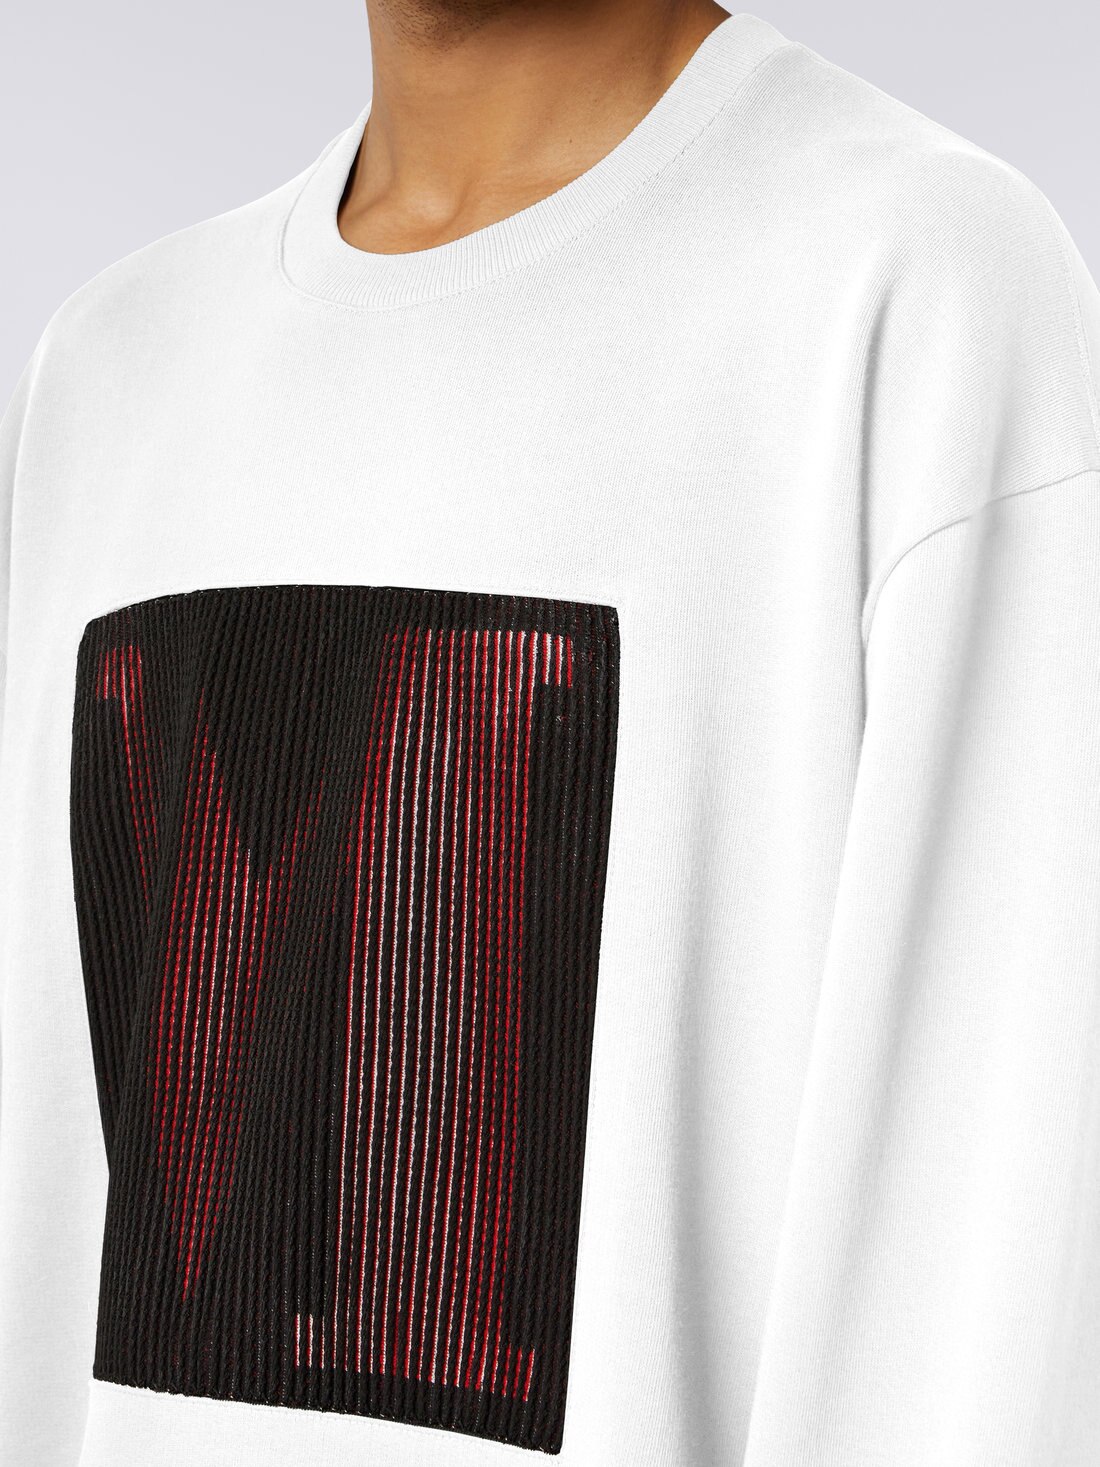 Cotton crew-neck sweatshirt with macro logo in collaboration with Mike Maignan, White - TS23SW05BJ00HYS019Y - 4